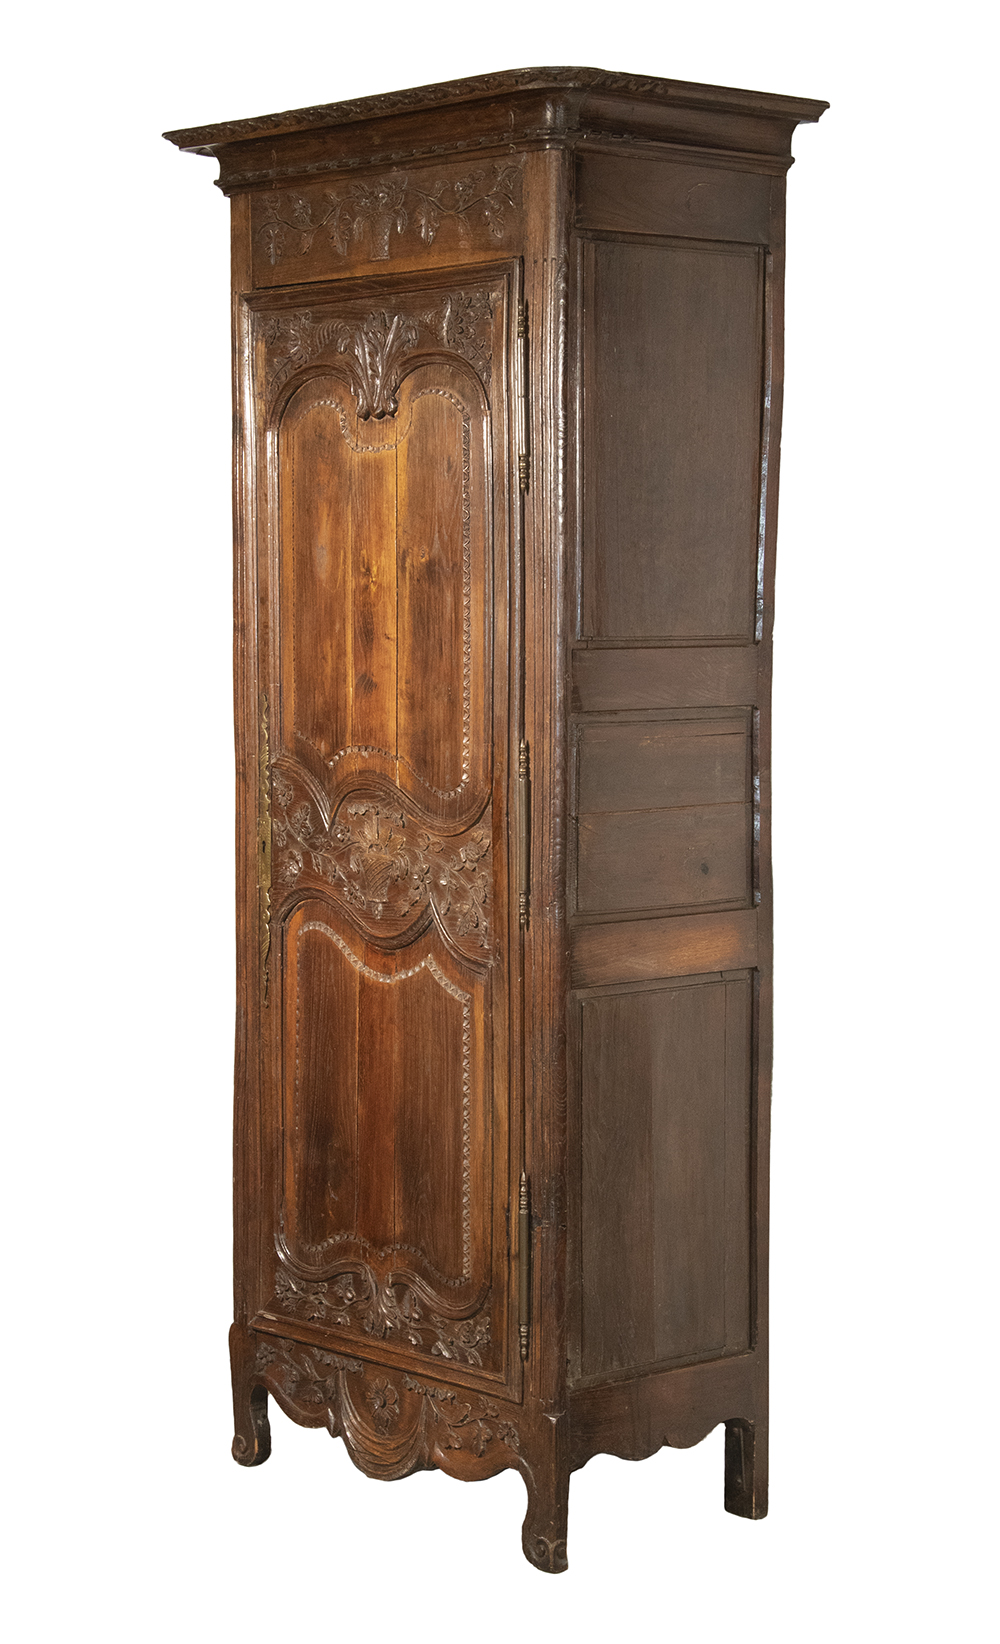 CARVED FRENCH CUPBOARD 18th c  2b4bed